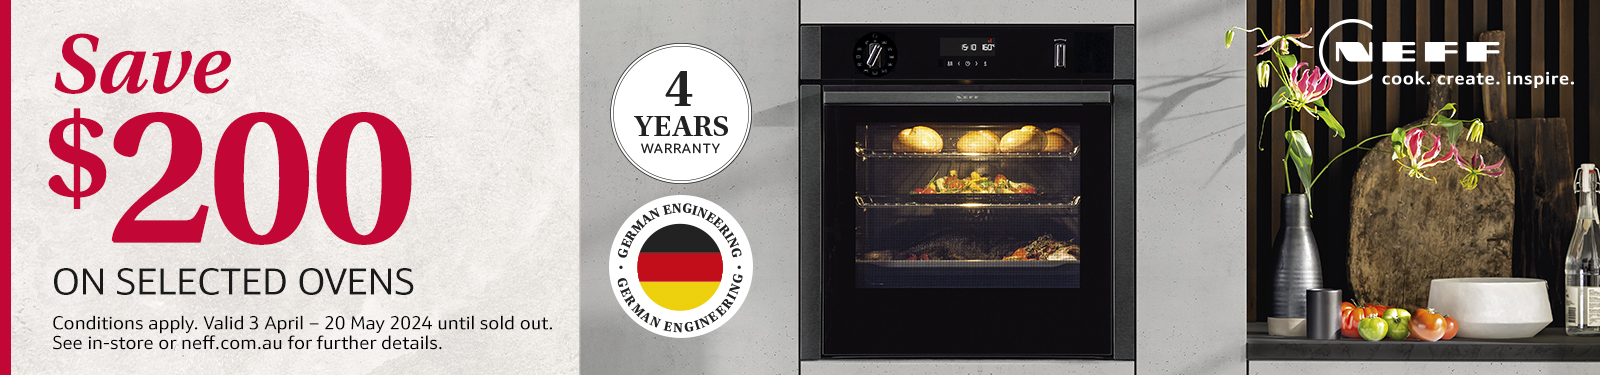 Save Up To $200 On Selected Neff Ovens